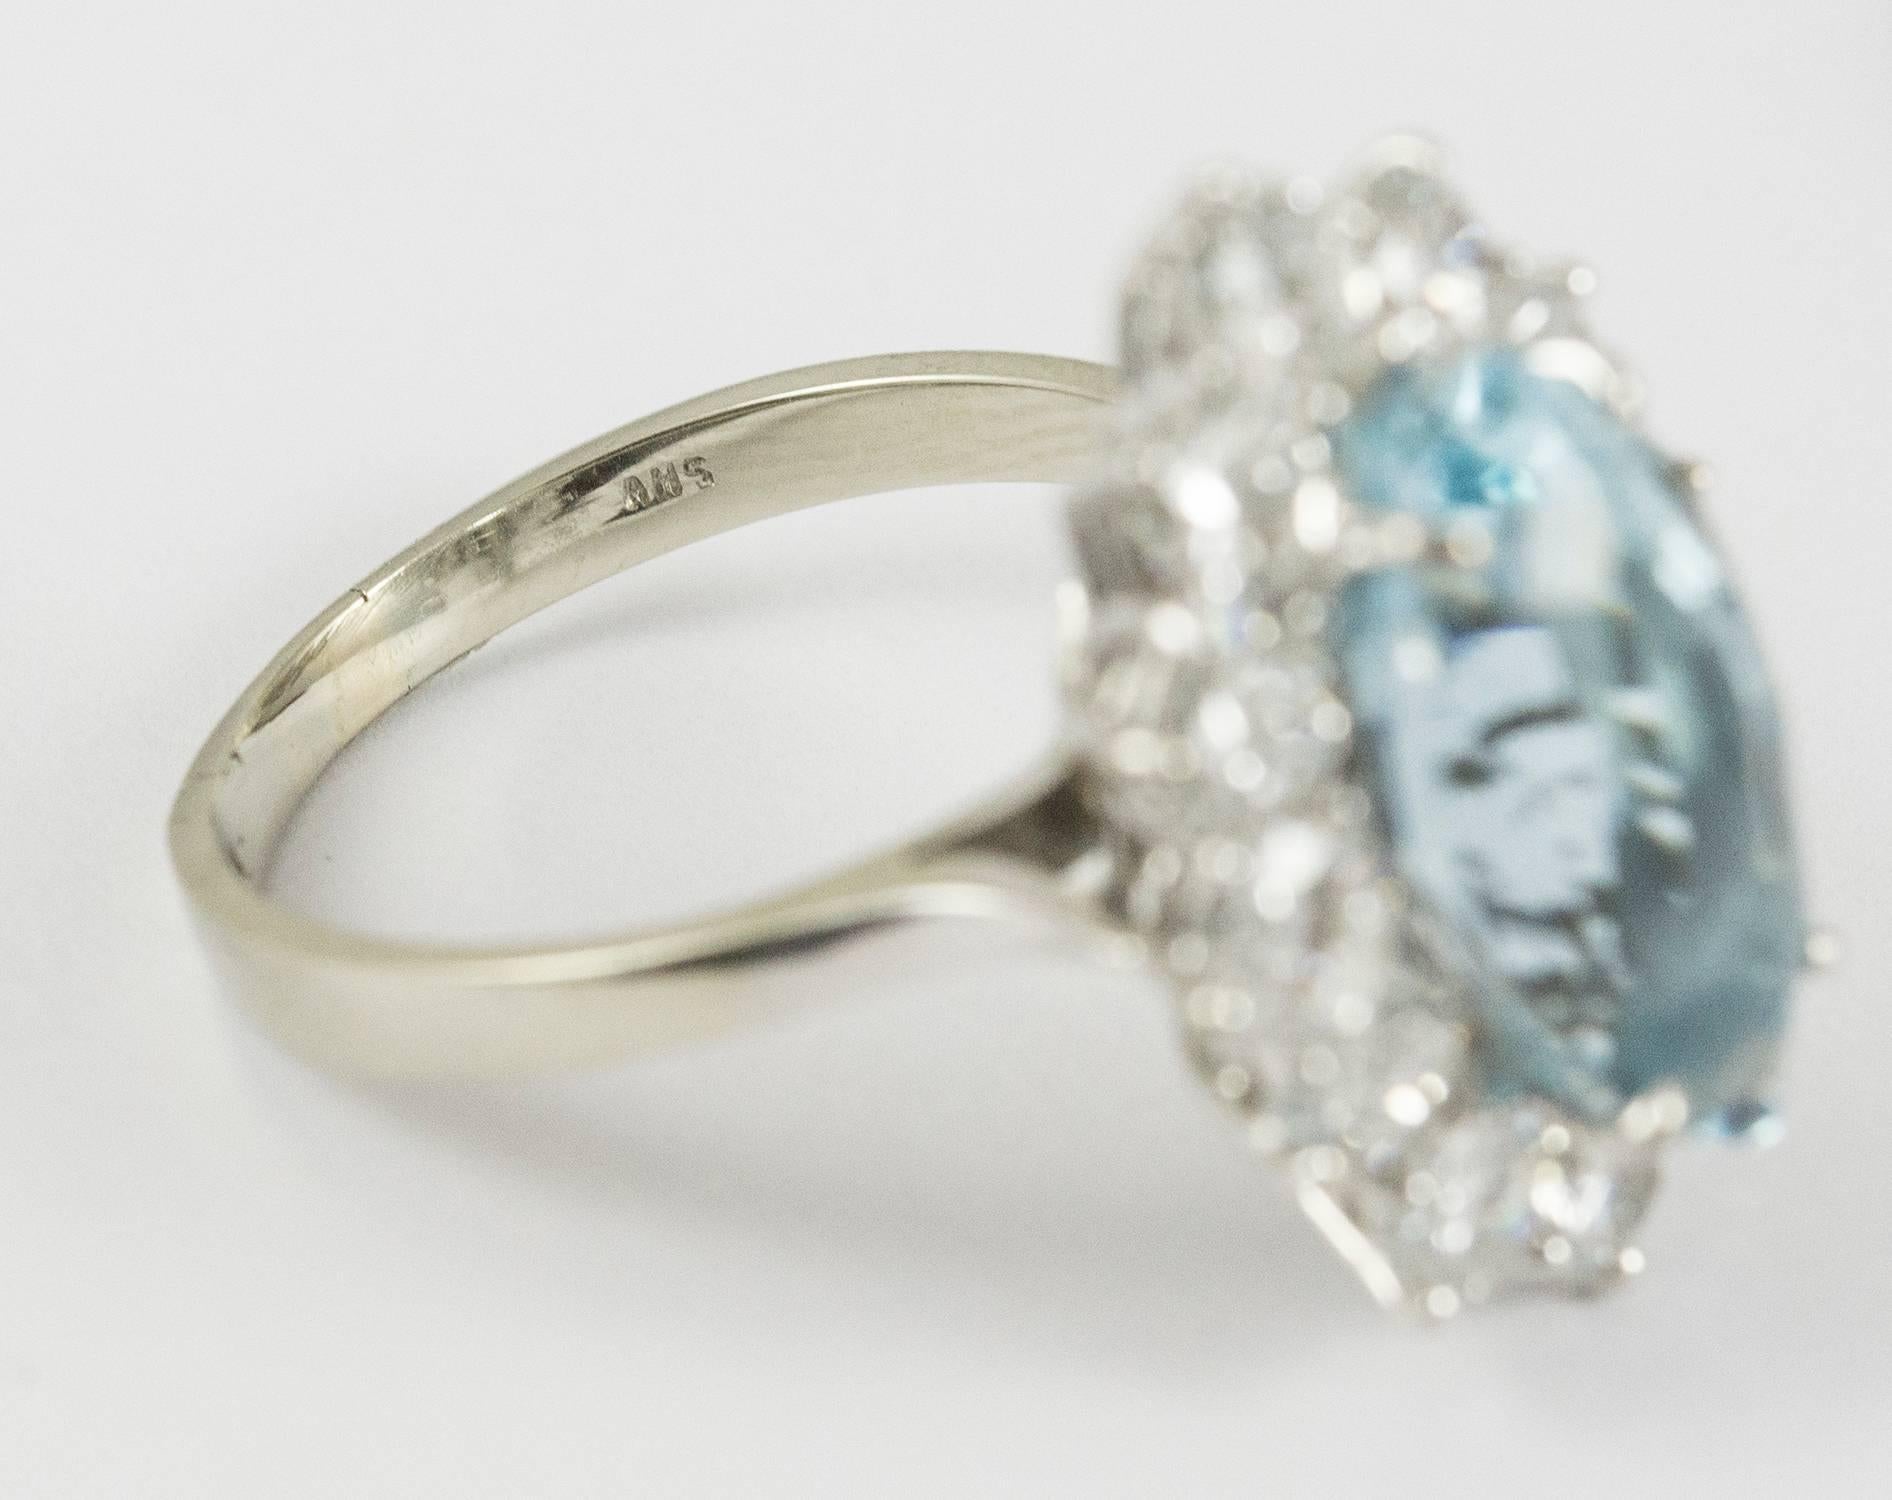 Custom Made Aquamarine Diamond Gold Ring In Excellent Condition For Sale In Toronto, Ontario